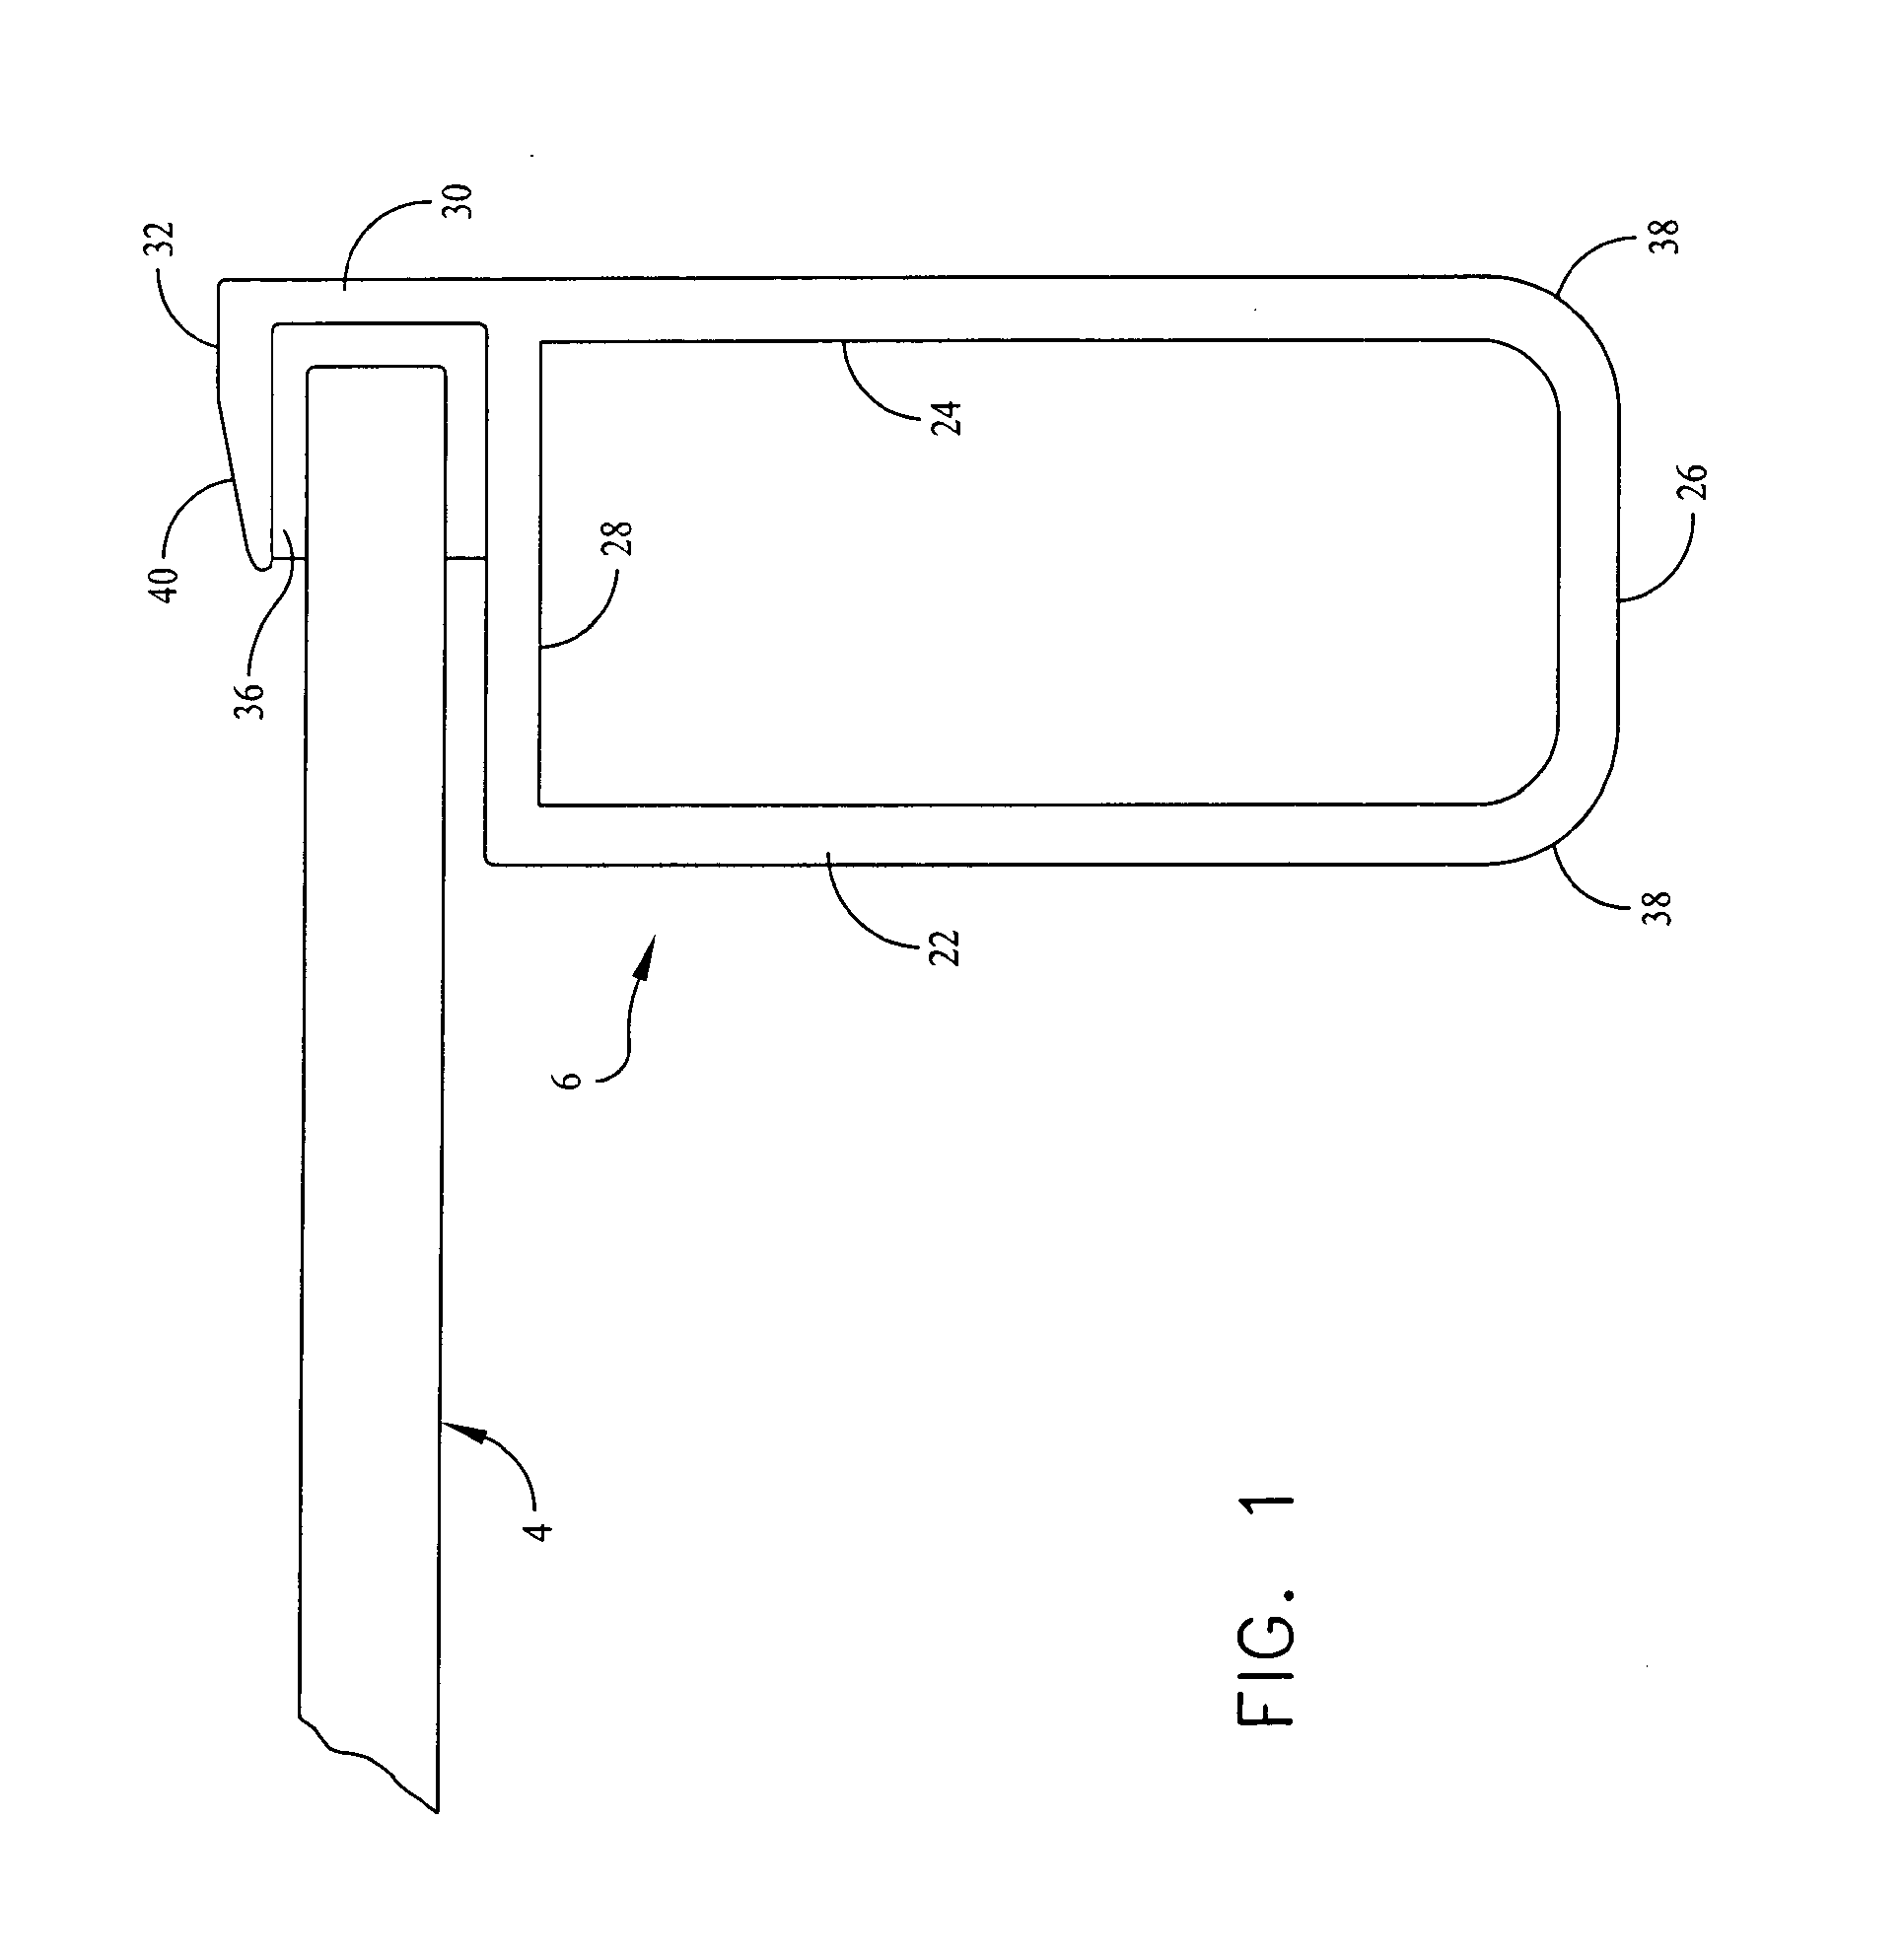 Multi-function frame and integrated mounting system for photovoltaic power generating laminates